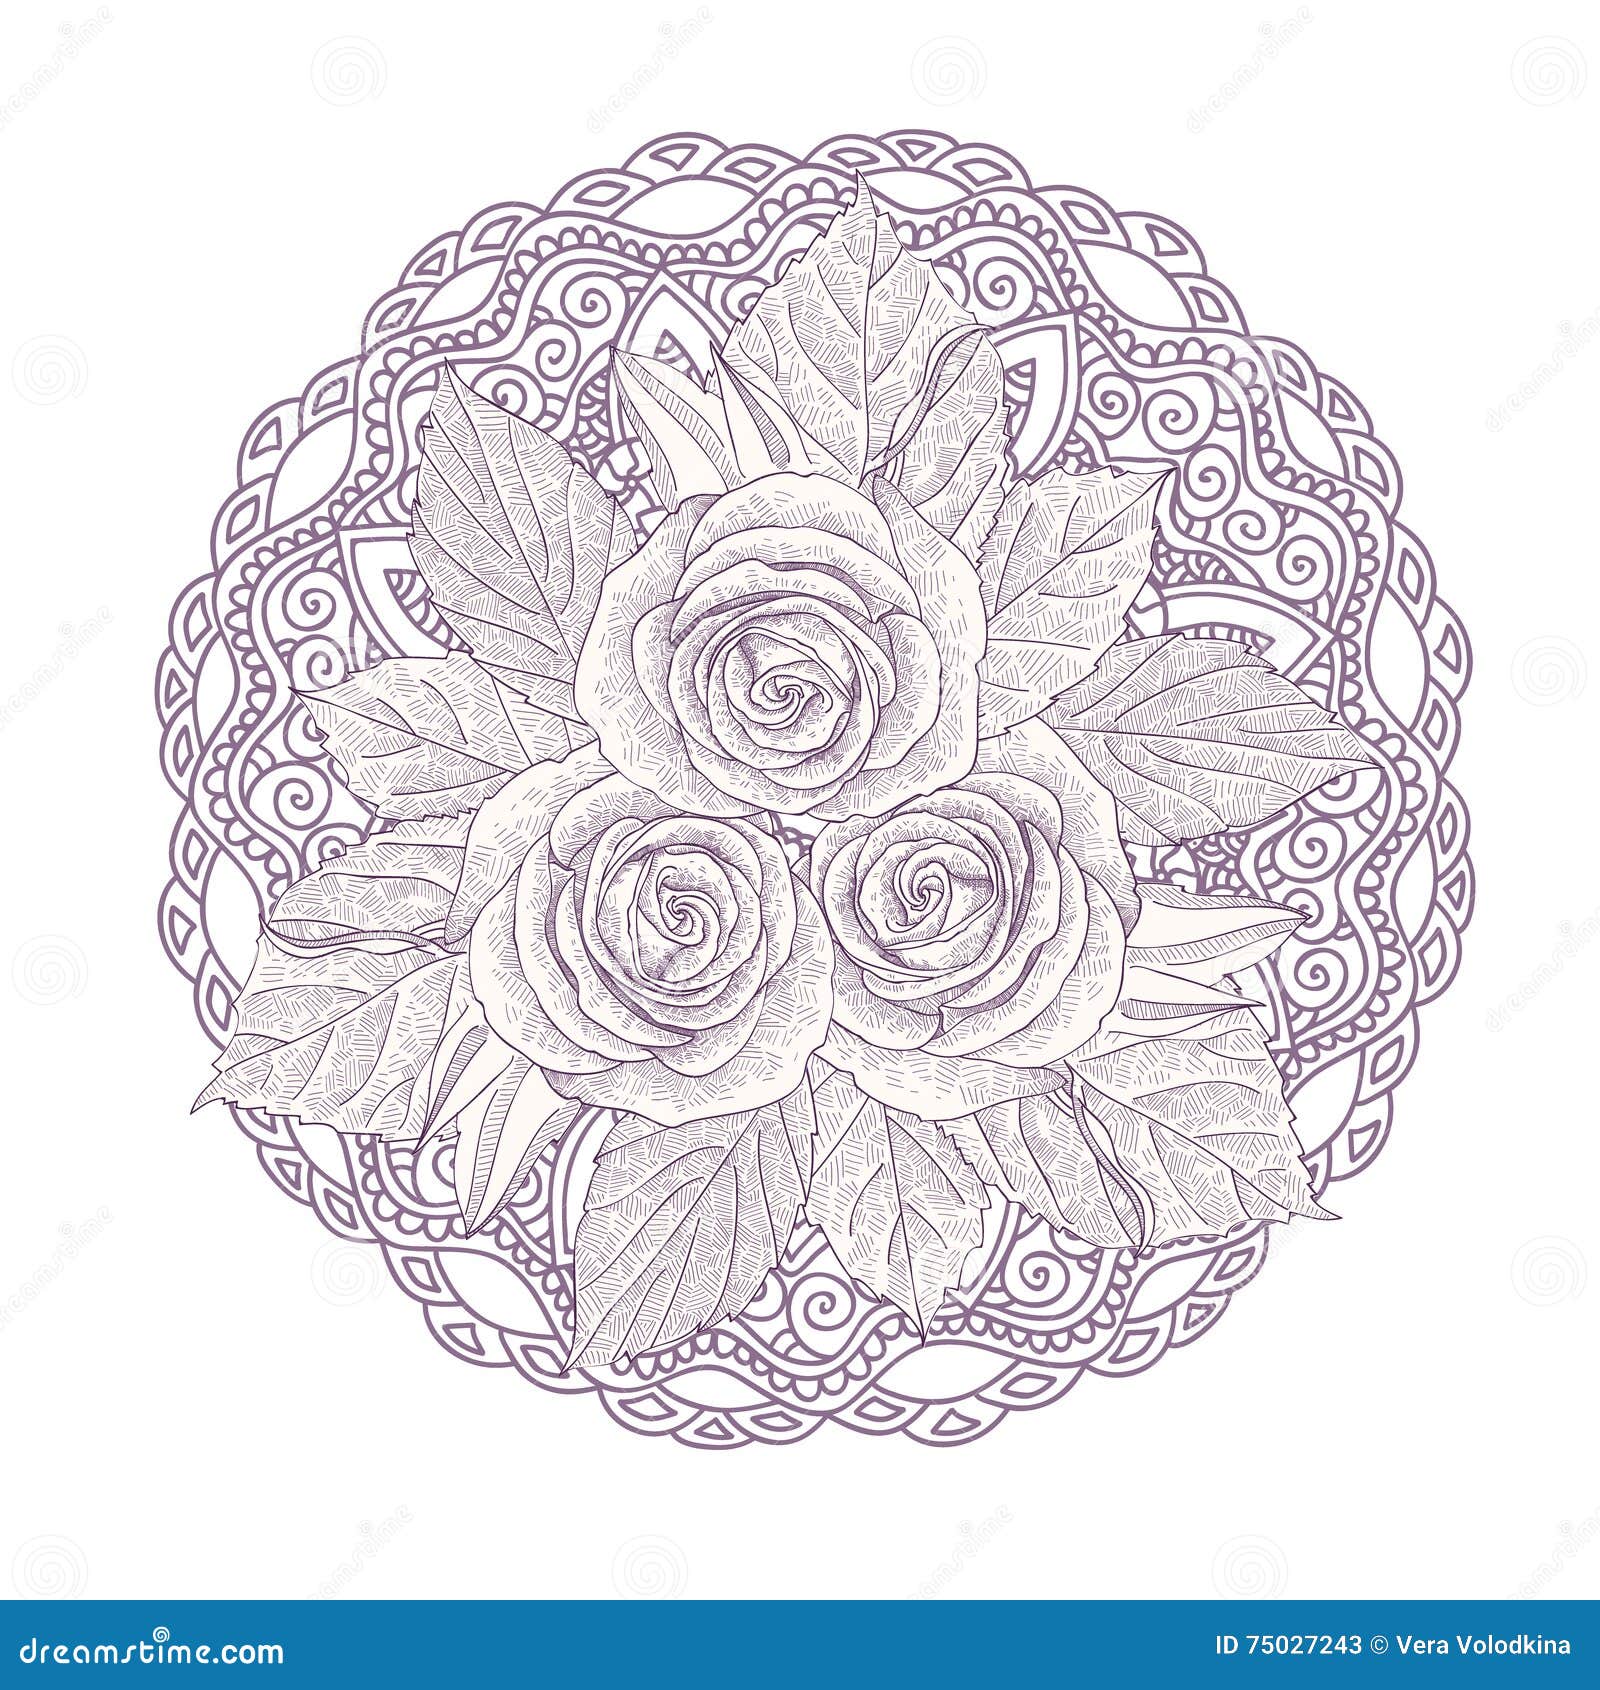 Download Mandala With Bouquet Of Three Roses Isolated On White ...